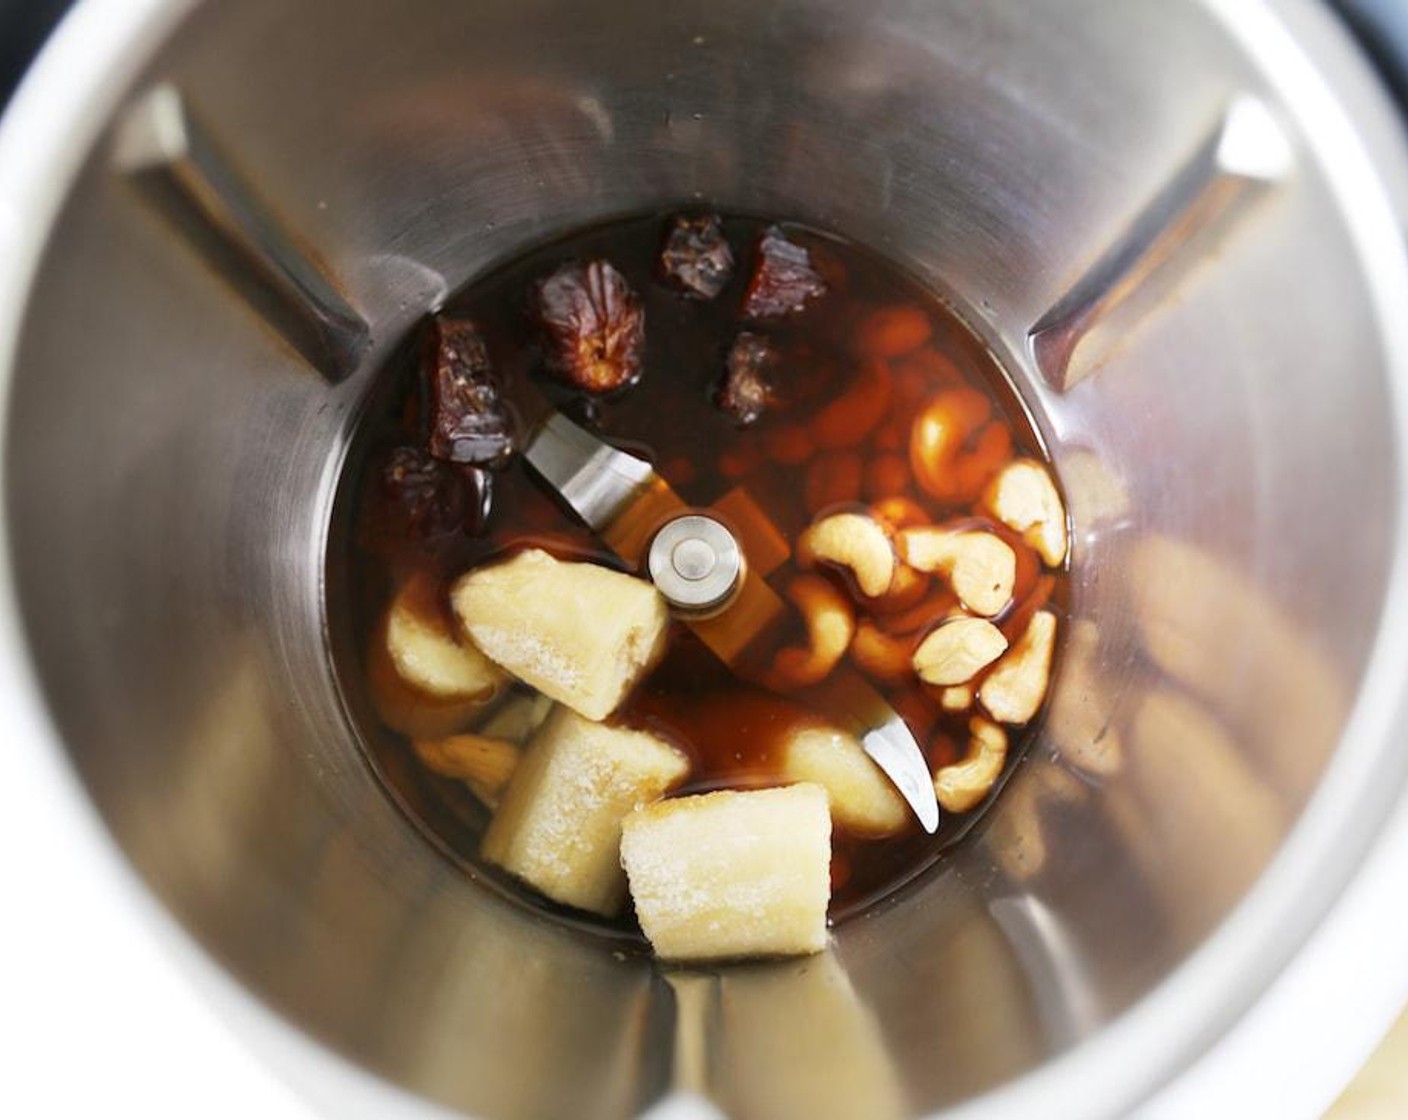 step 1 Combine Banana (1/2 cup), Dates (1/4 cup), Cashew Nuts (2/3 cup), Vanilla Extract (1 1/4 tsp), and Water (9 oz) in the jug and blend on Speed 8 for 2 minutes. Set aside in the refrigerator.